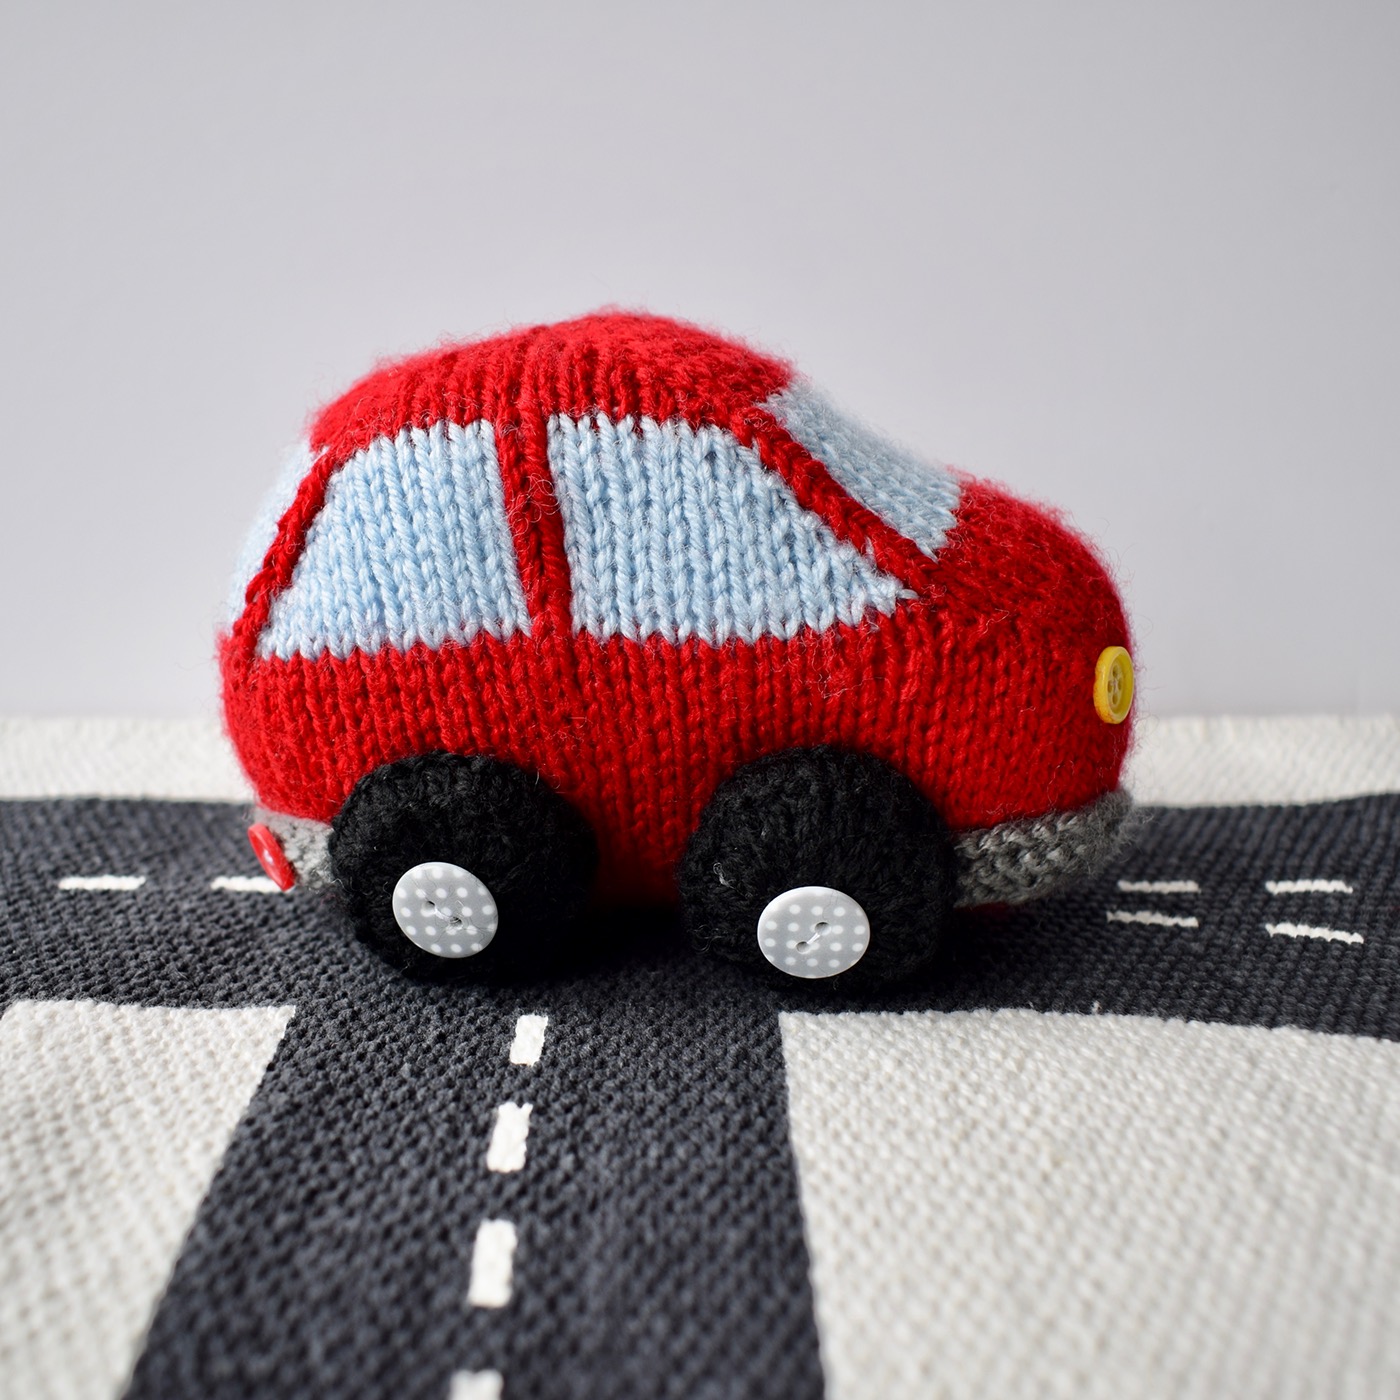 knitting knitted car bubble knit pattern toys toy Vehicle Auto